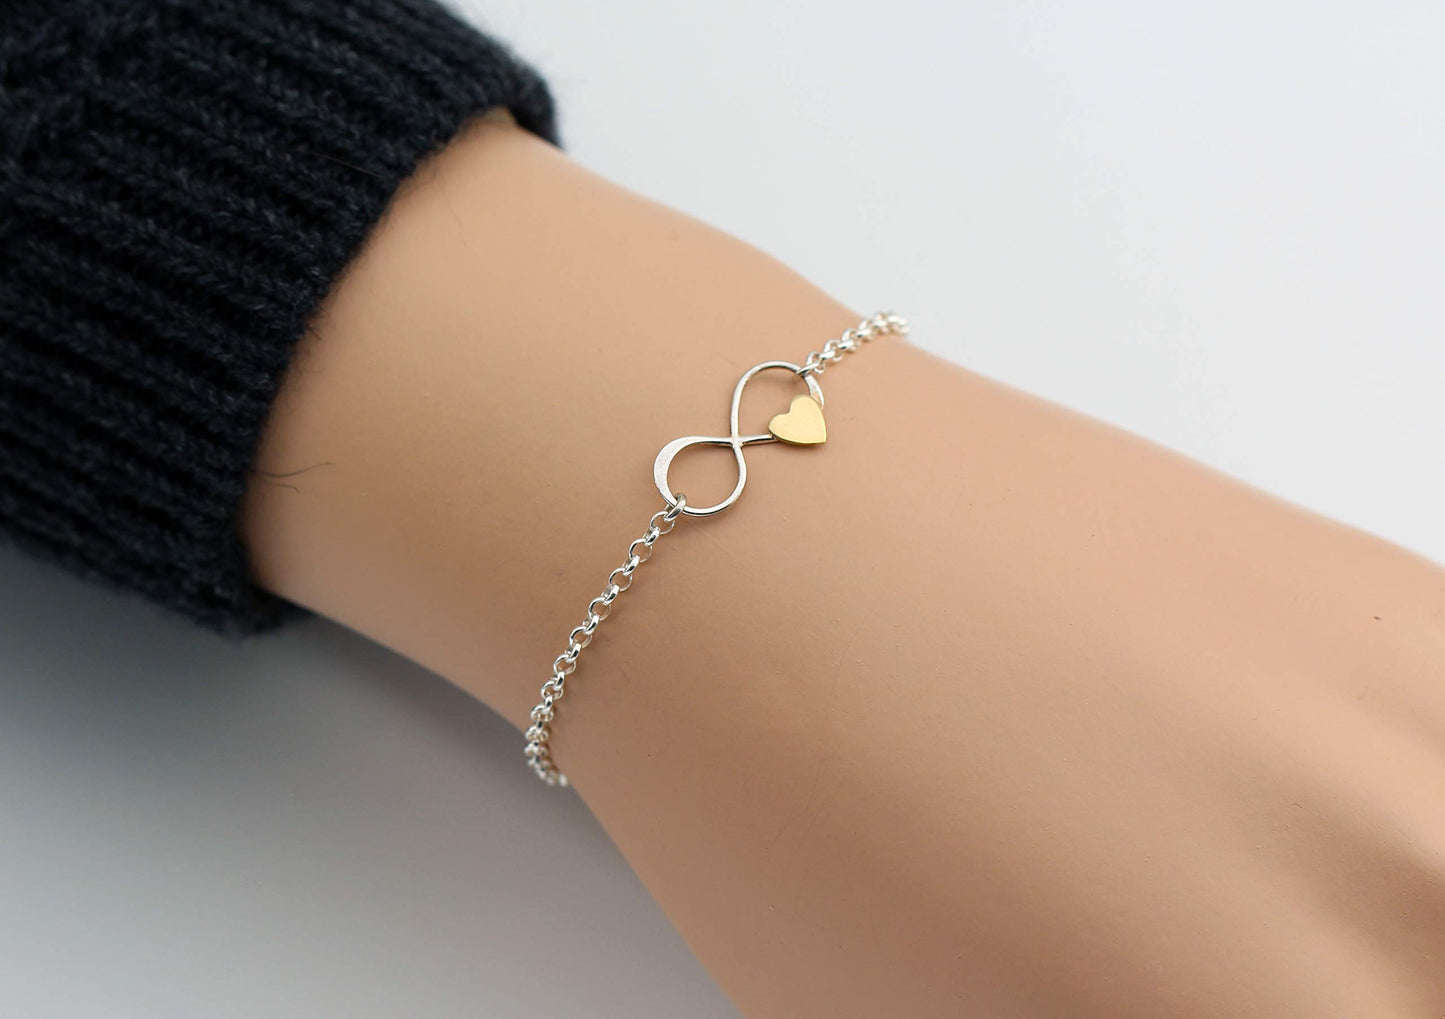 A Charmed Impression Nanny Gifts from Kids for Women • Gift for Nanny Bracelet • Sterling Silver Bracelet • Babysitter Gratitude and Appreciation Jewelry • Best Nanny Ever • Infinity Gold Heart Charm